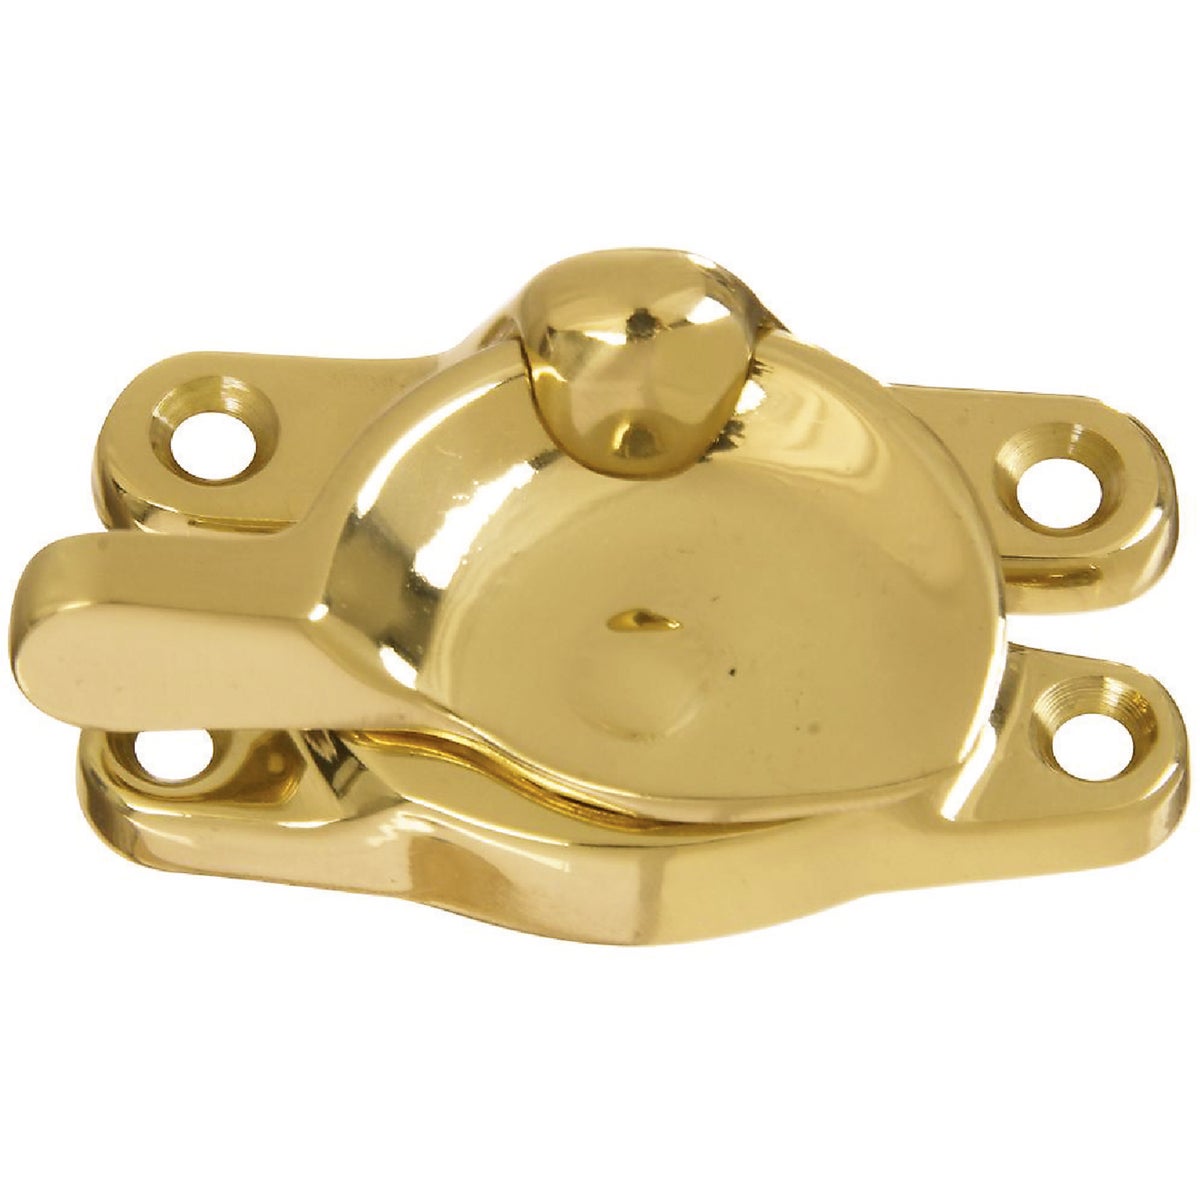 Item 241407, Gallery Series. Solid brass. Polished brass finish.